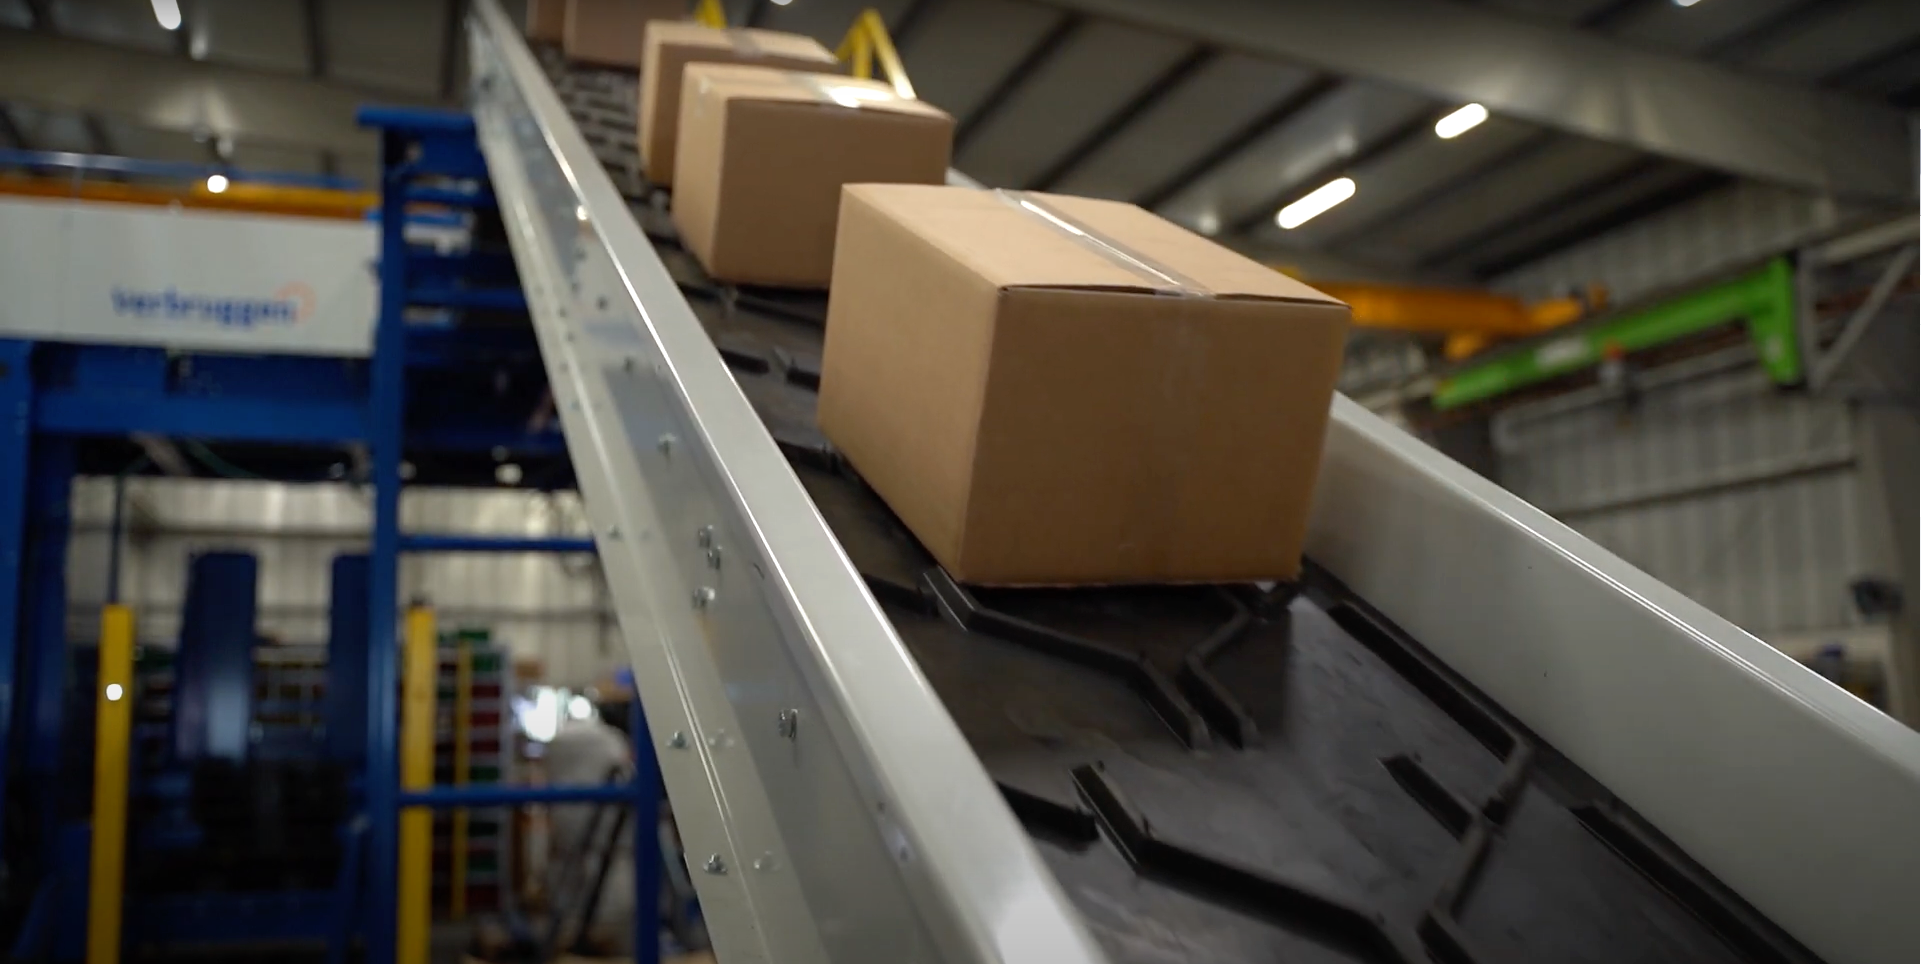 Palletizing machine in action: Stacking foodboxes